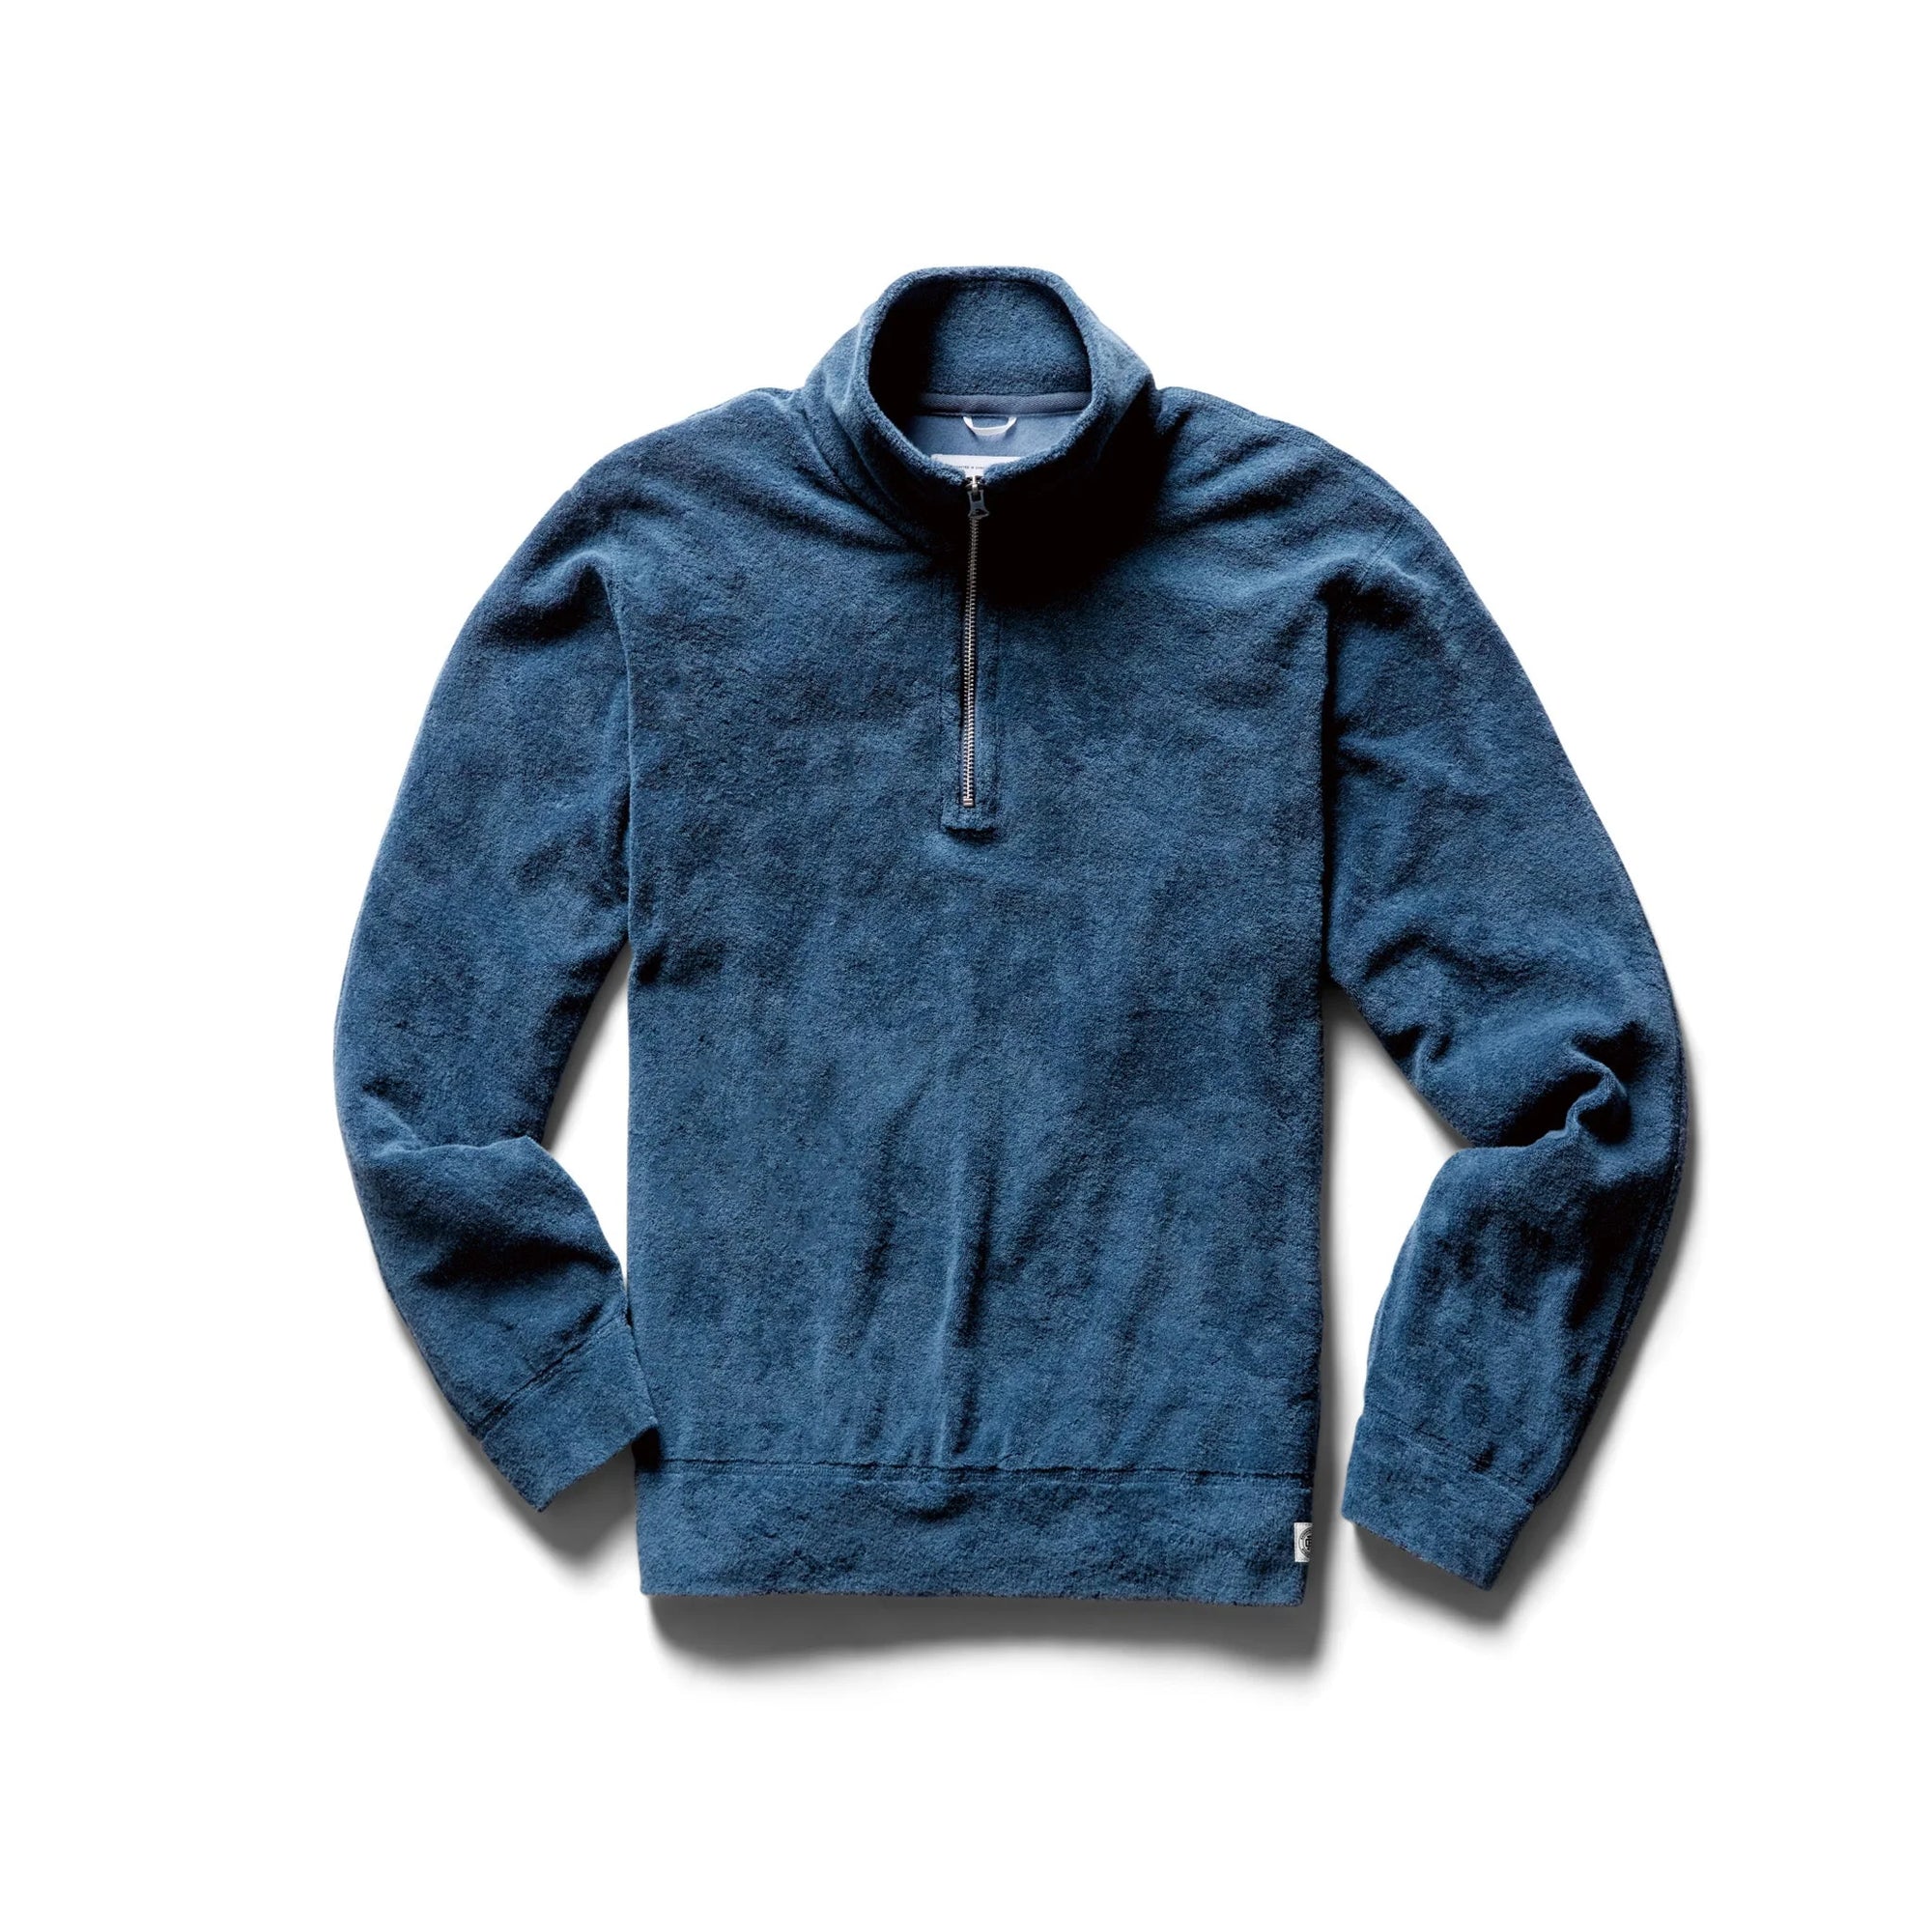 Reigning Champ Towel Terry Classic Quarter Zip in Washed Blue